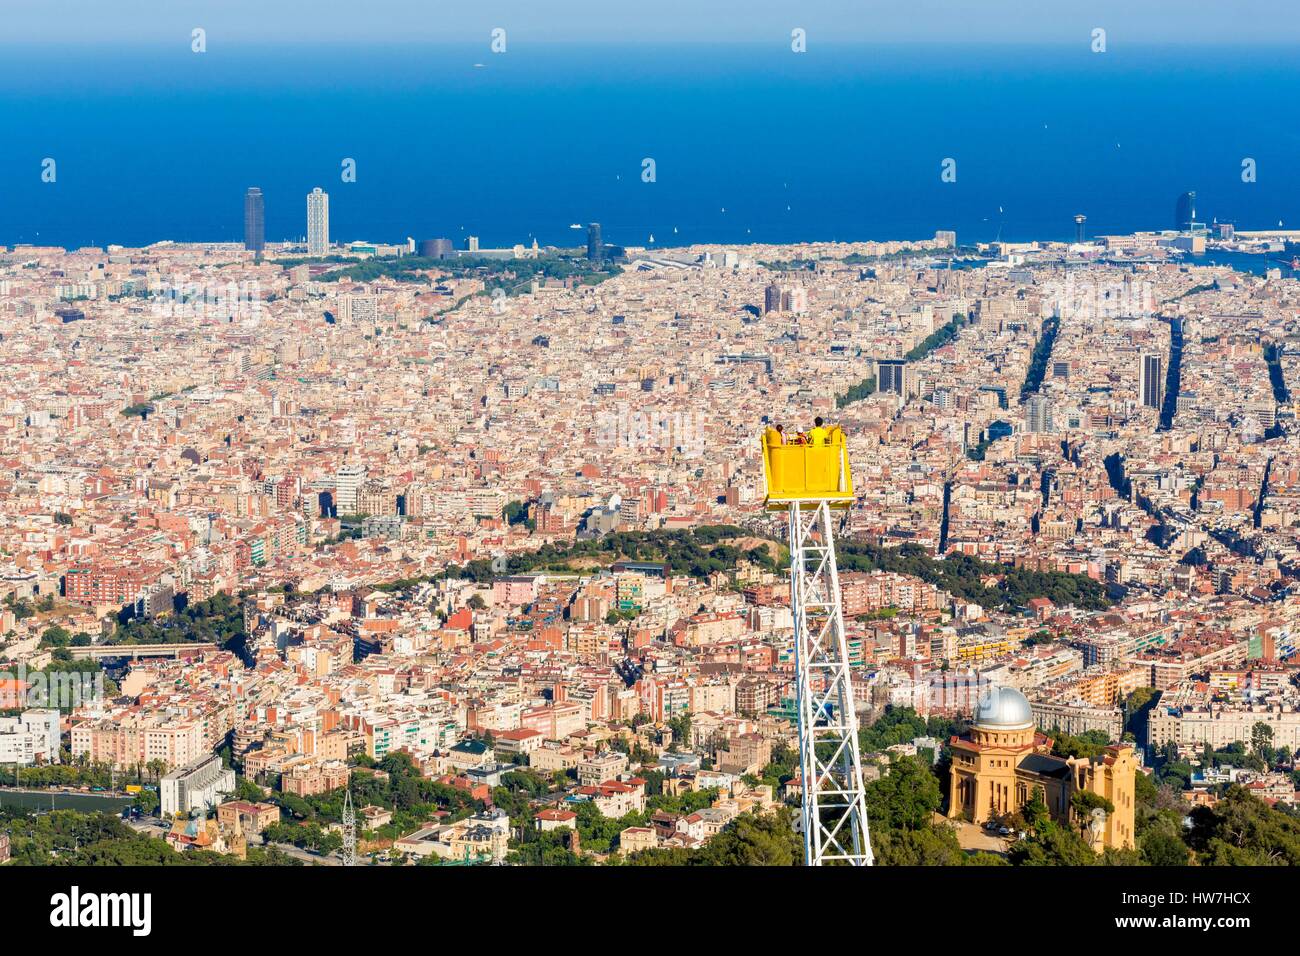 Spain, Catalonia, Barcelona, view from the amusement park Tibidabo (Serra de Collserola), founded in 1901 on the Eixample district, La Barceloneta and the old town Stock Photo